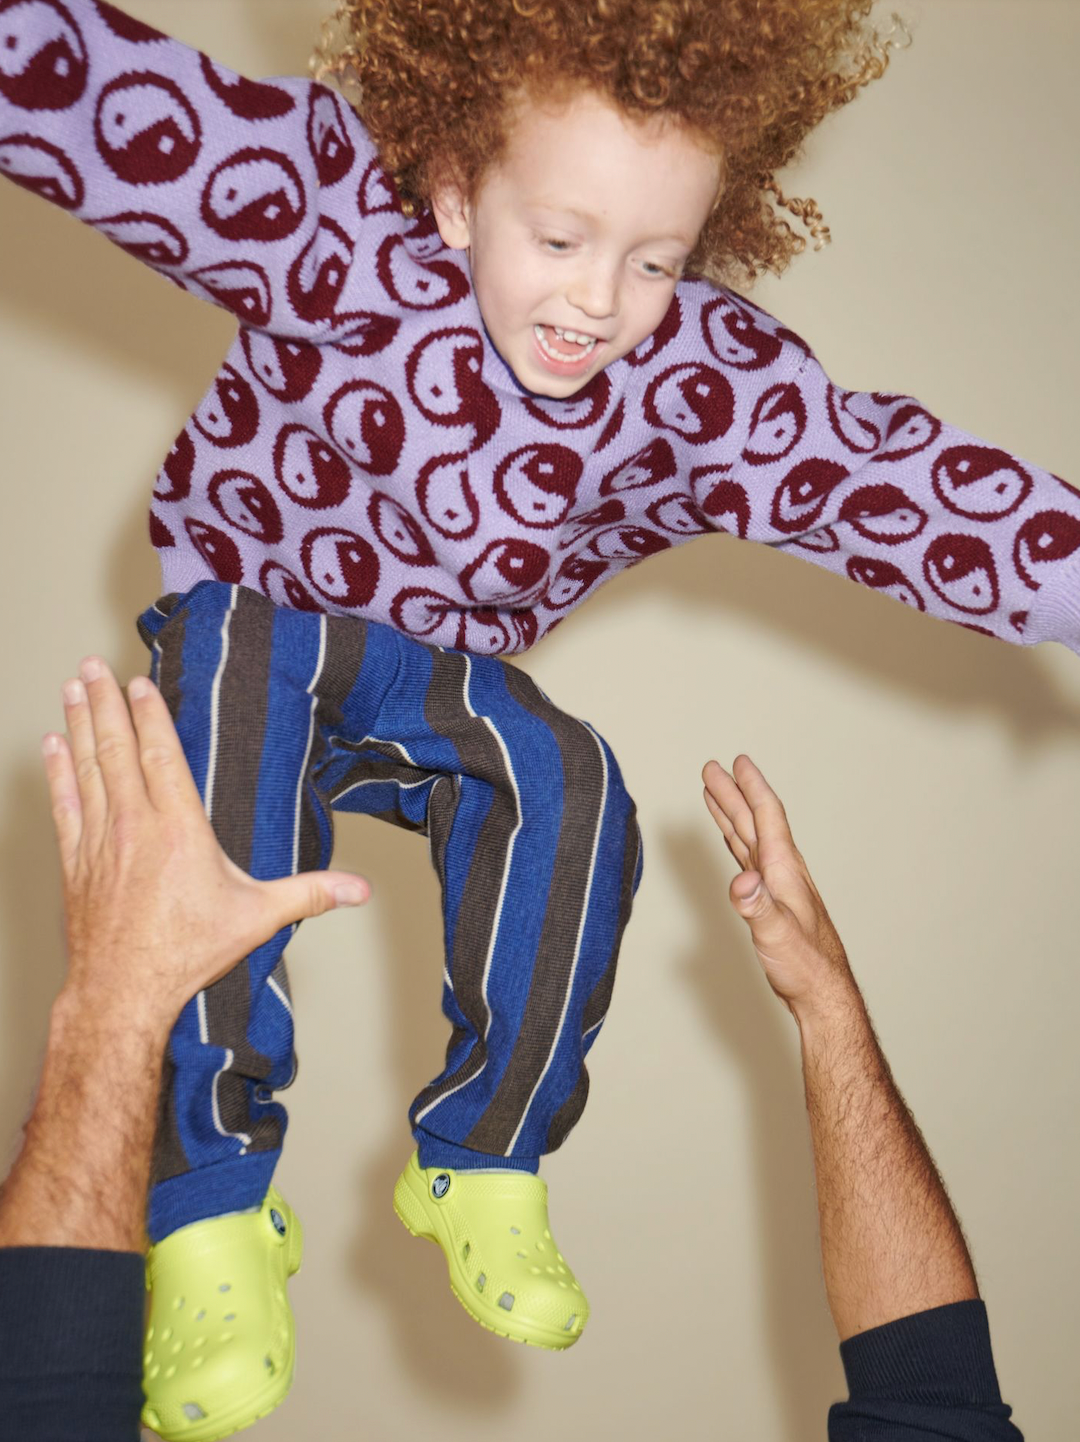 A laughing child being thrown in the air wearing a kids' sweater of dark red yin and yang circles on a violet background